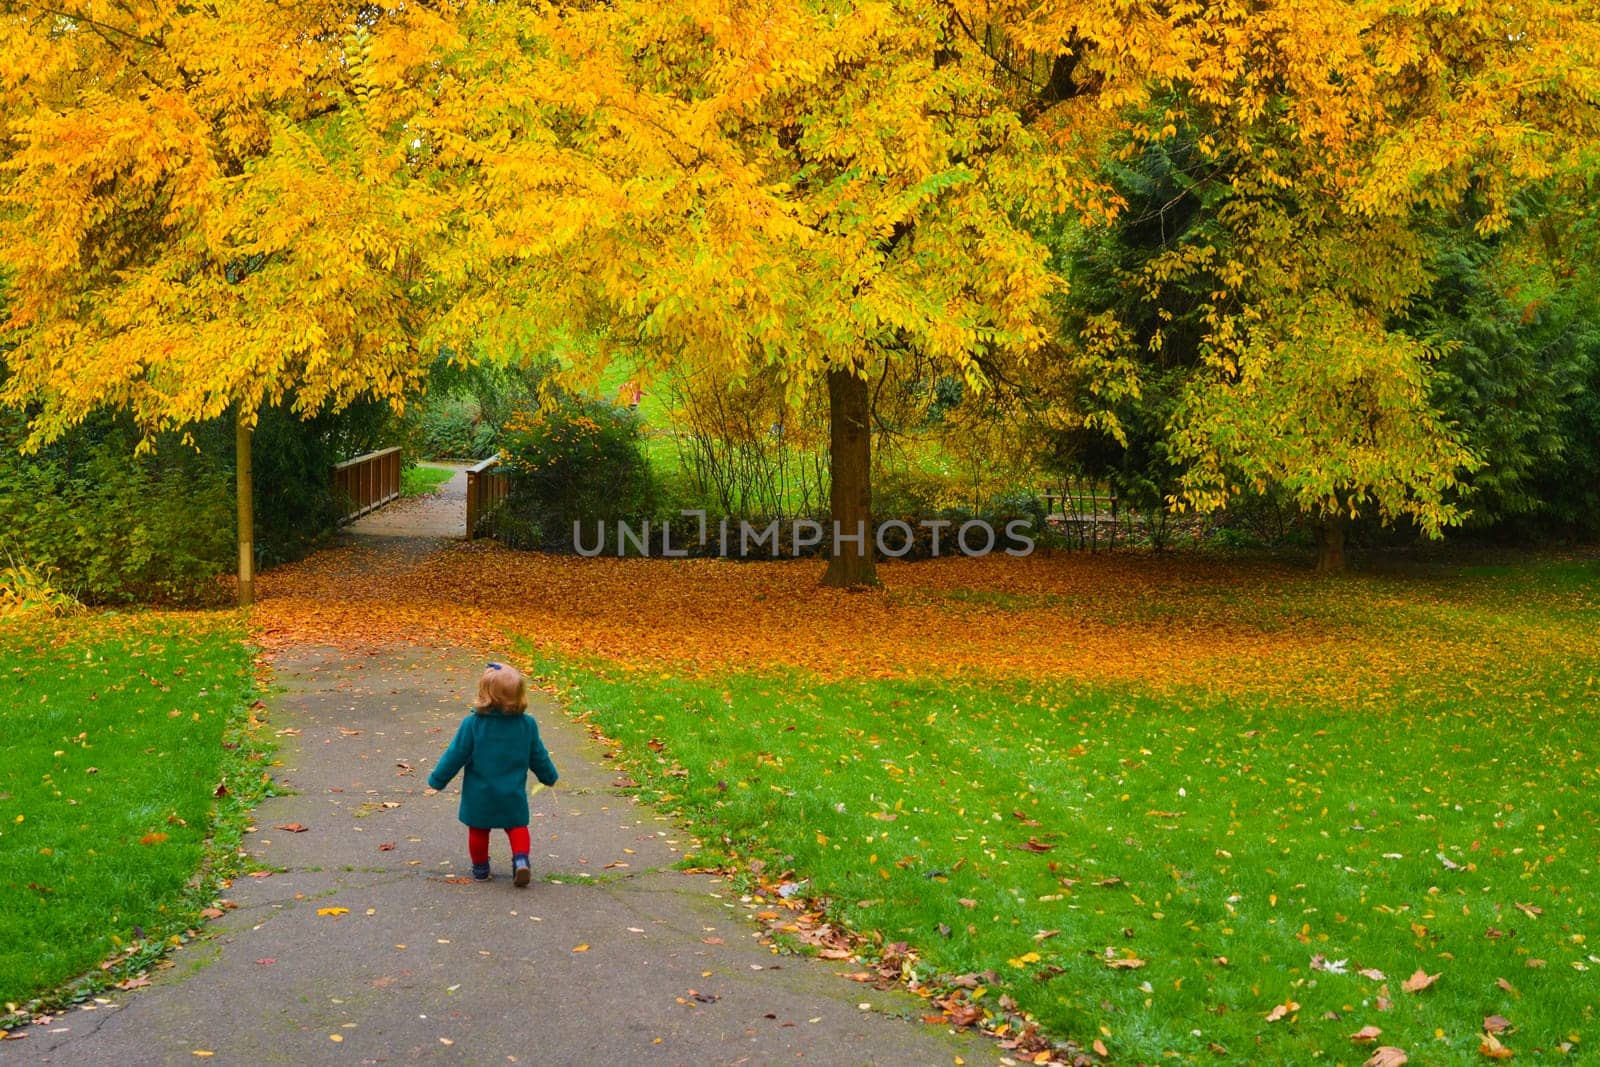 Autumn. Little girl runs away in a park with yellow trees and fallen leaves